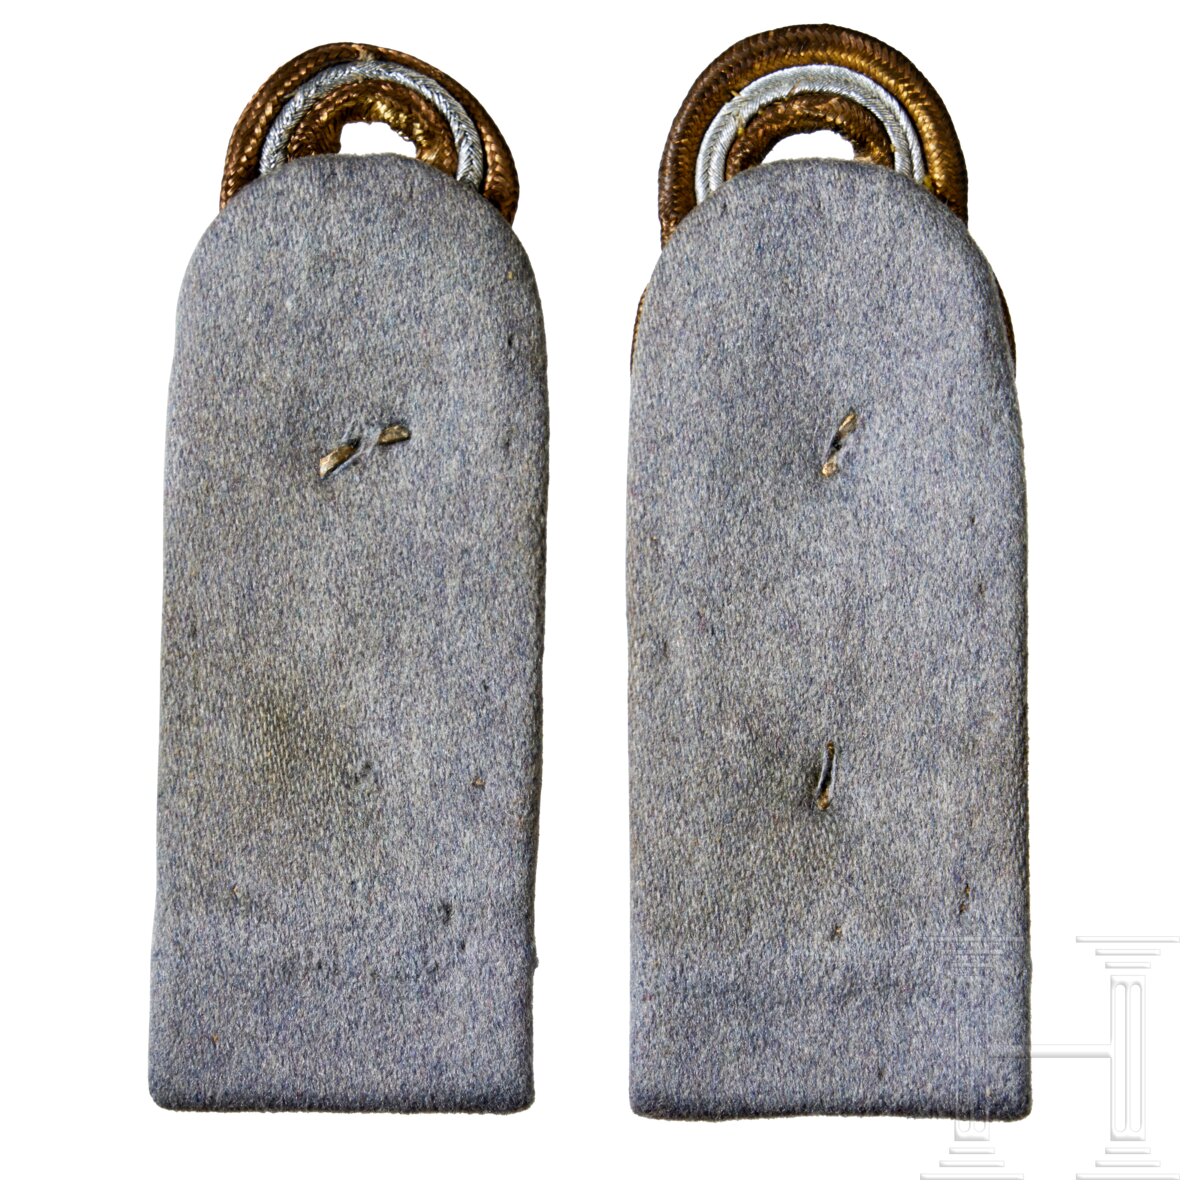 A Pair of Shoulder Boards for Waffen SS Obergruppenführer - Image 2 of 2